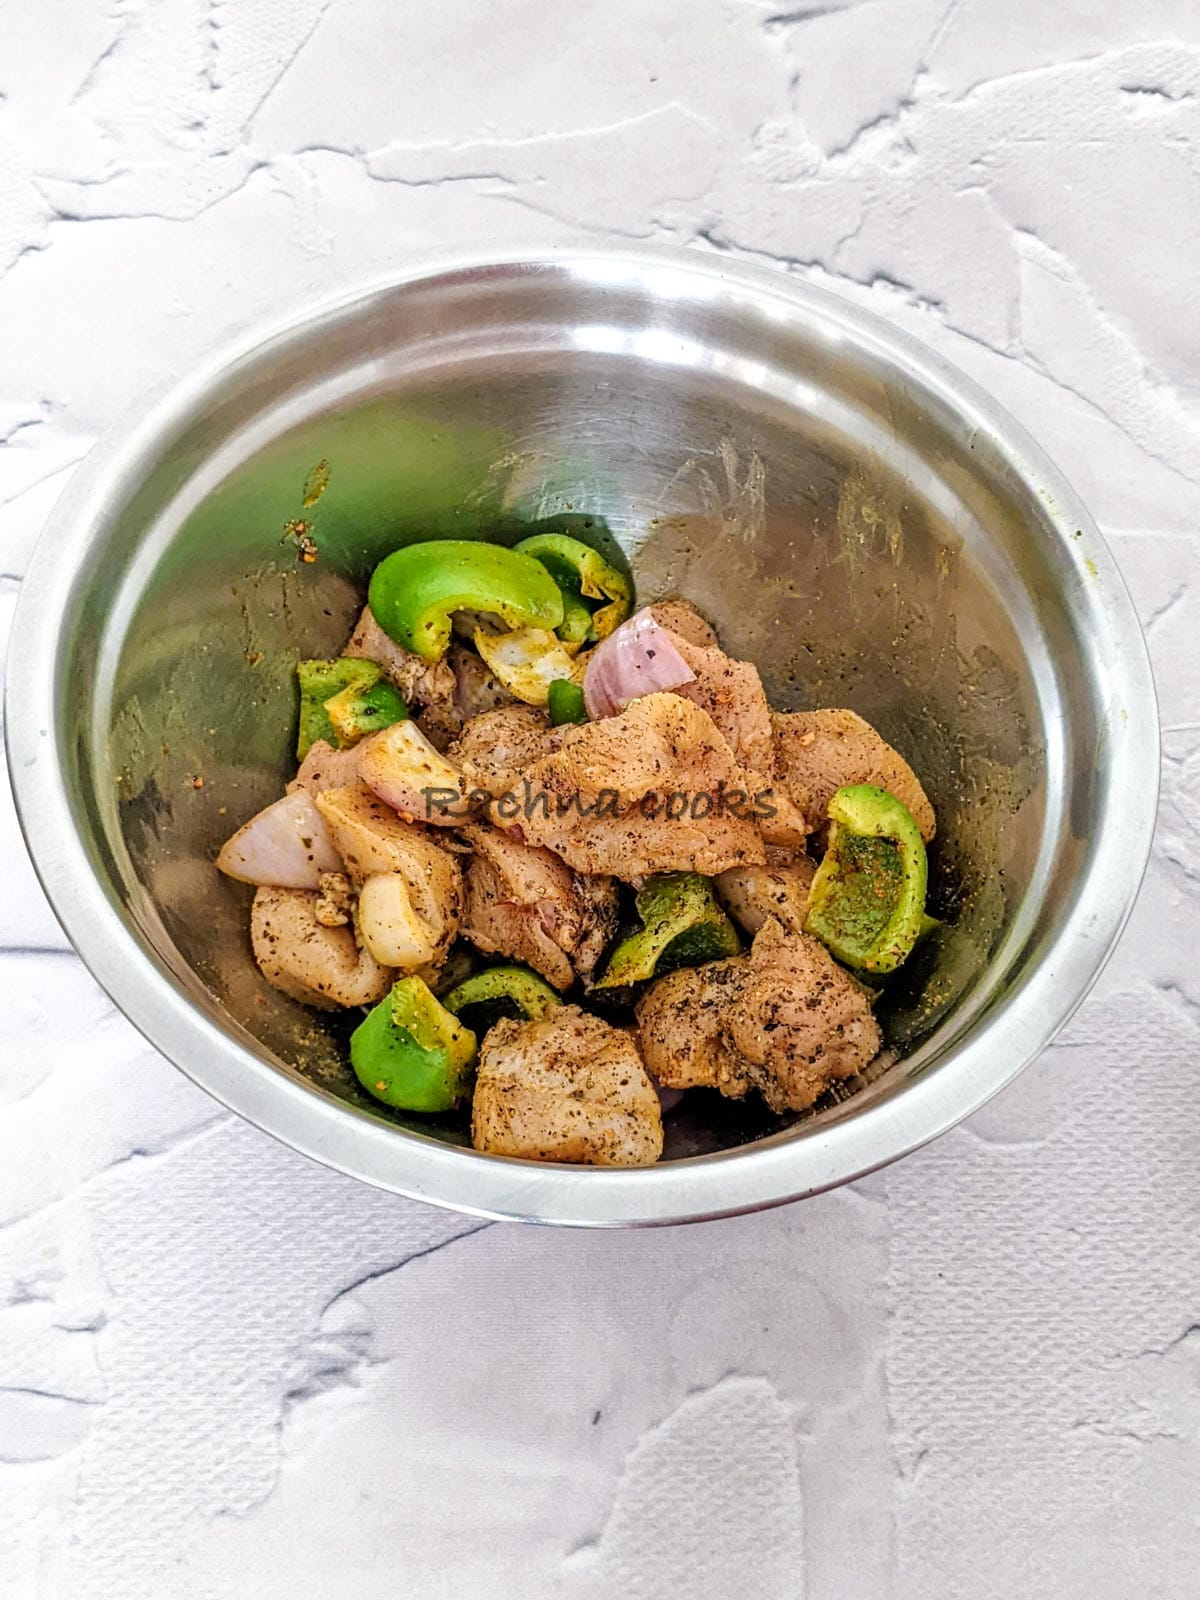 Chicken and veggies marinated in spices and oil in a steel bowl